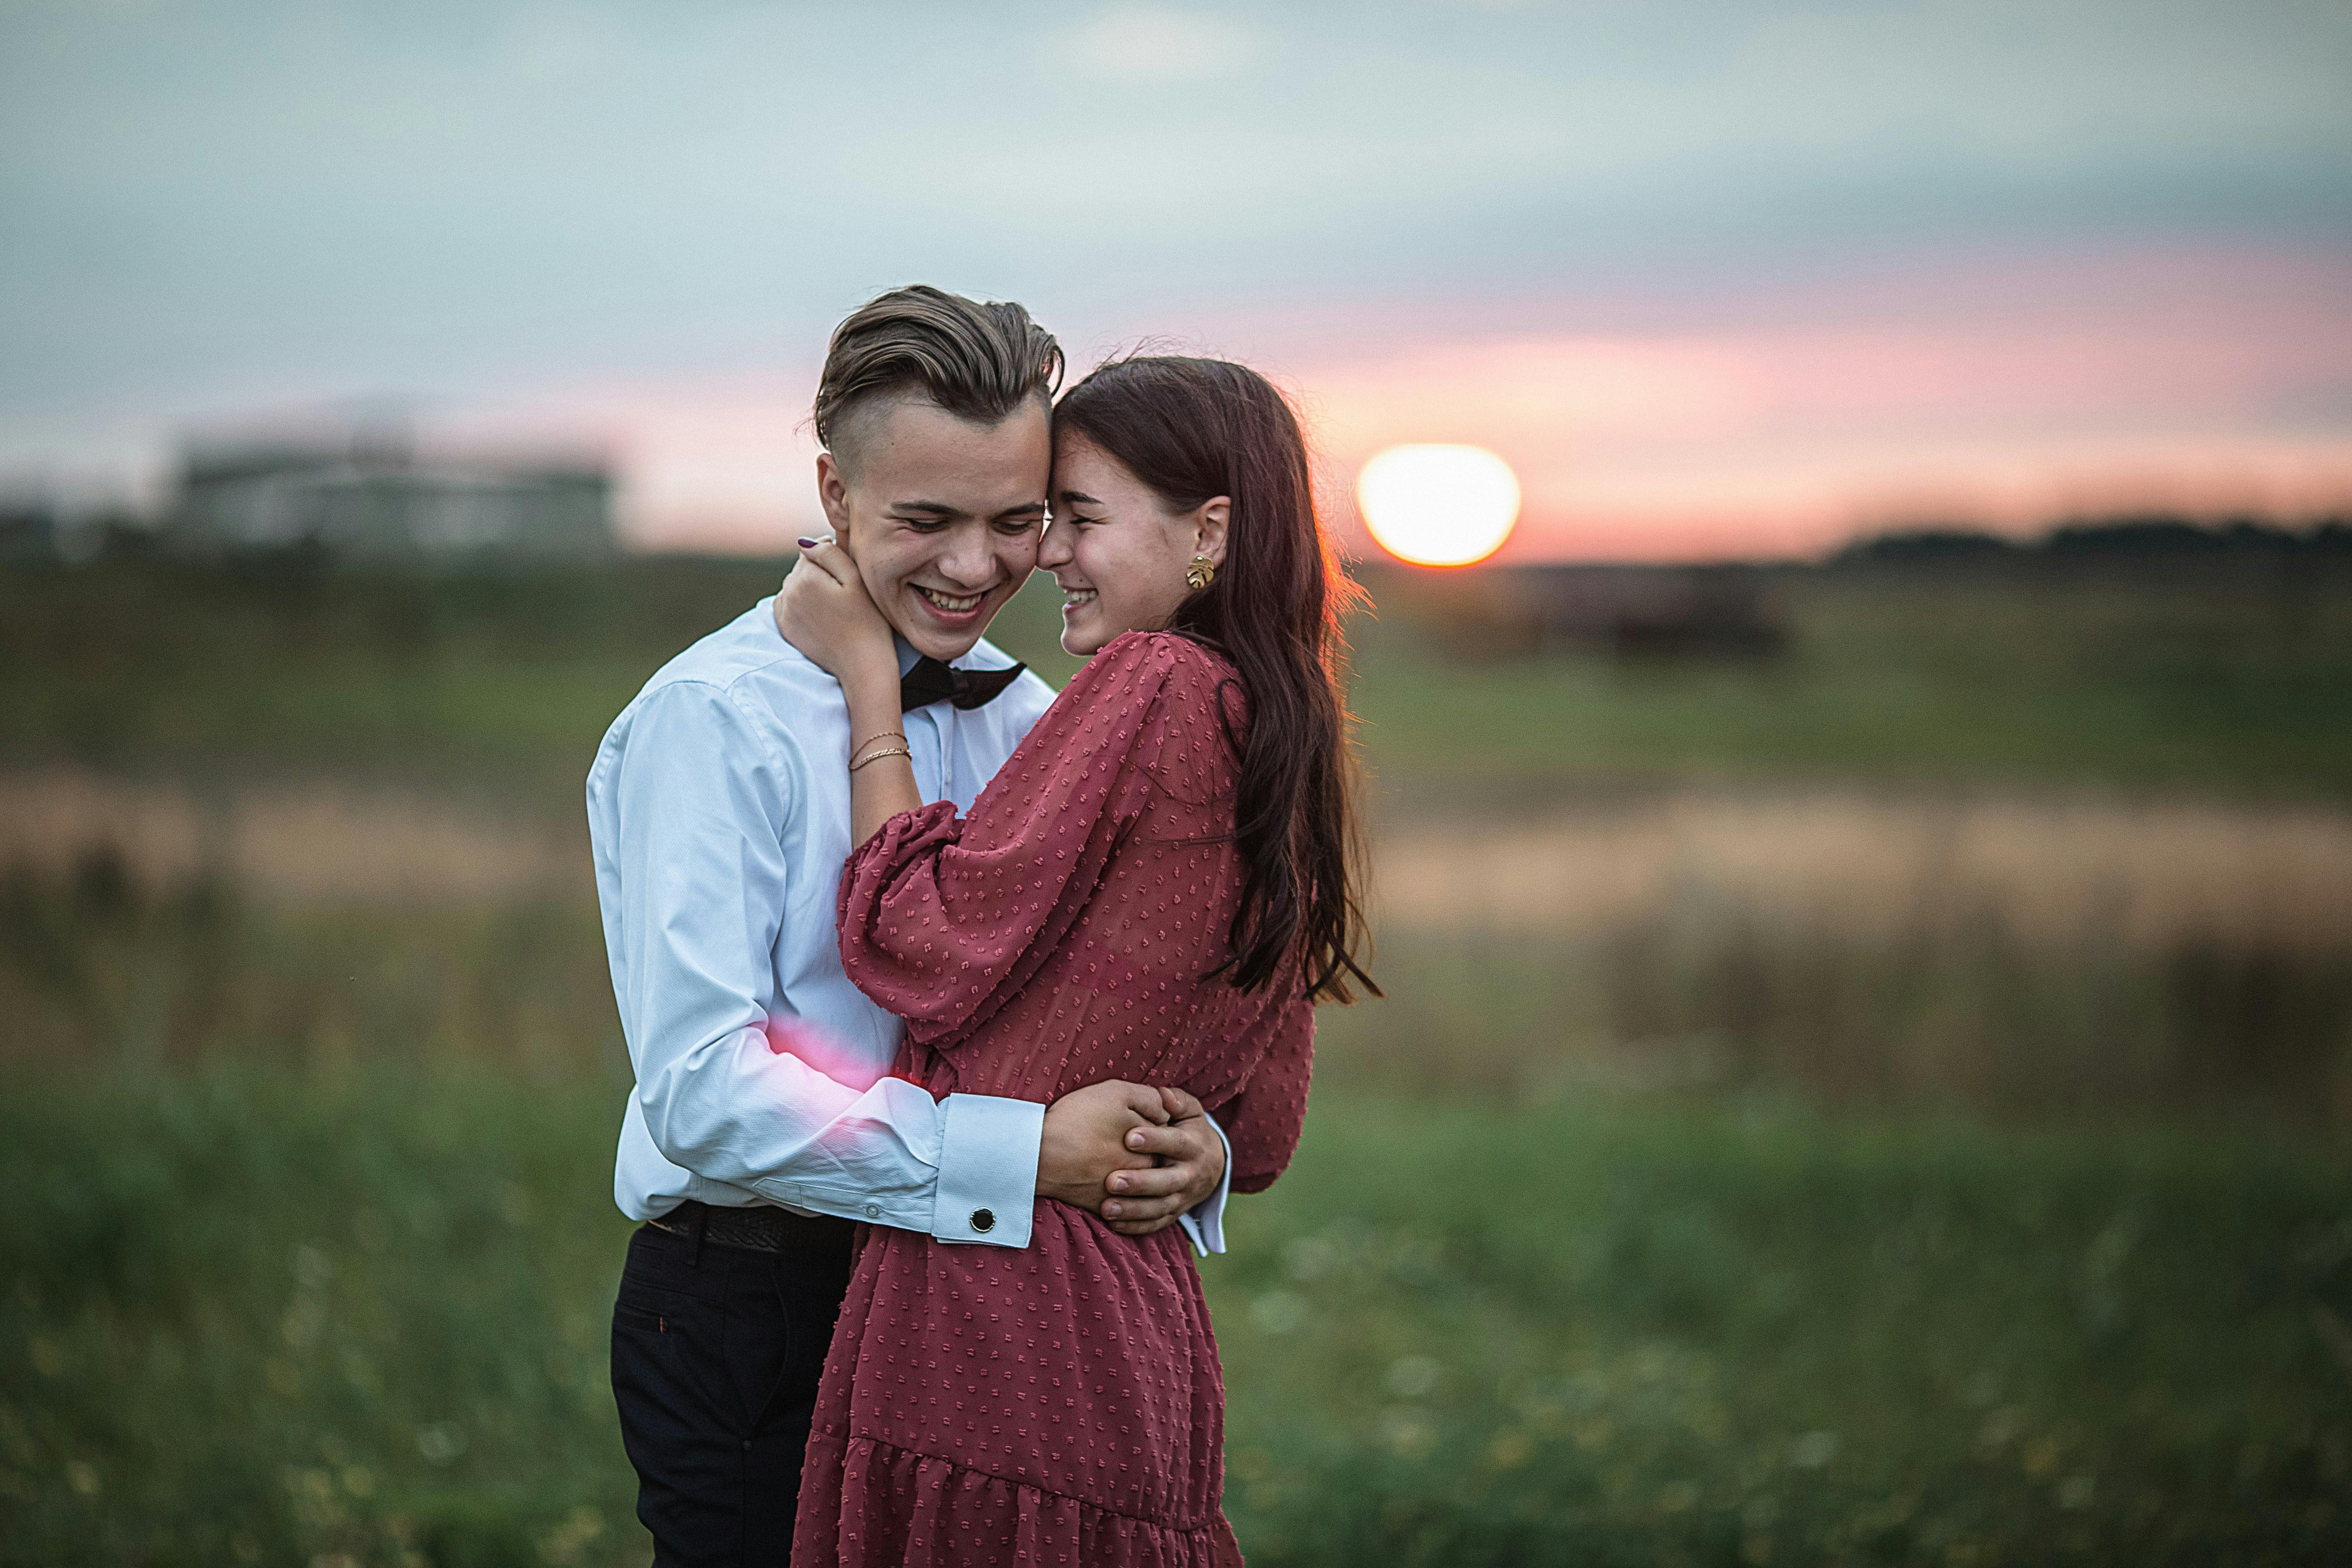 løgner sanger Skalk Happy young couple embracing during romantic date in nature at sundown ·  Free Stock Photo